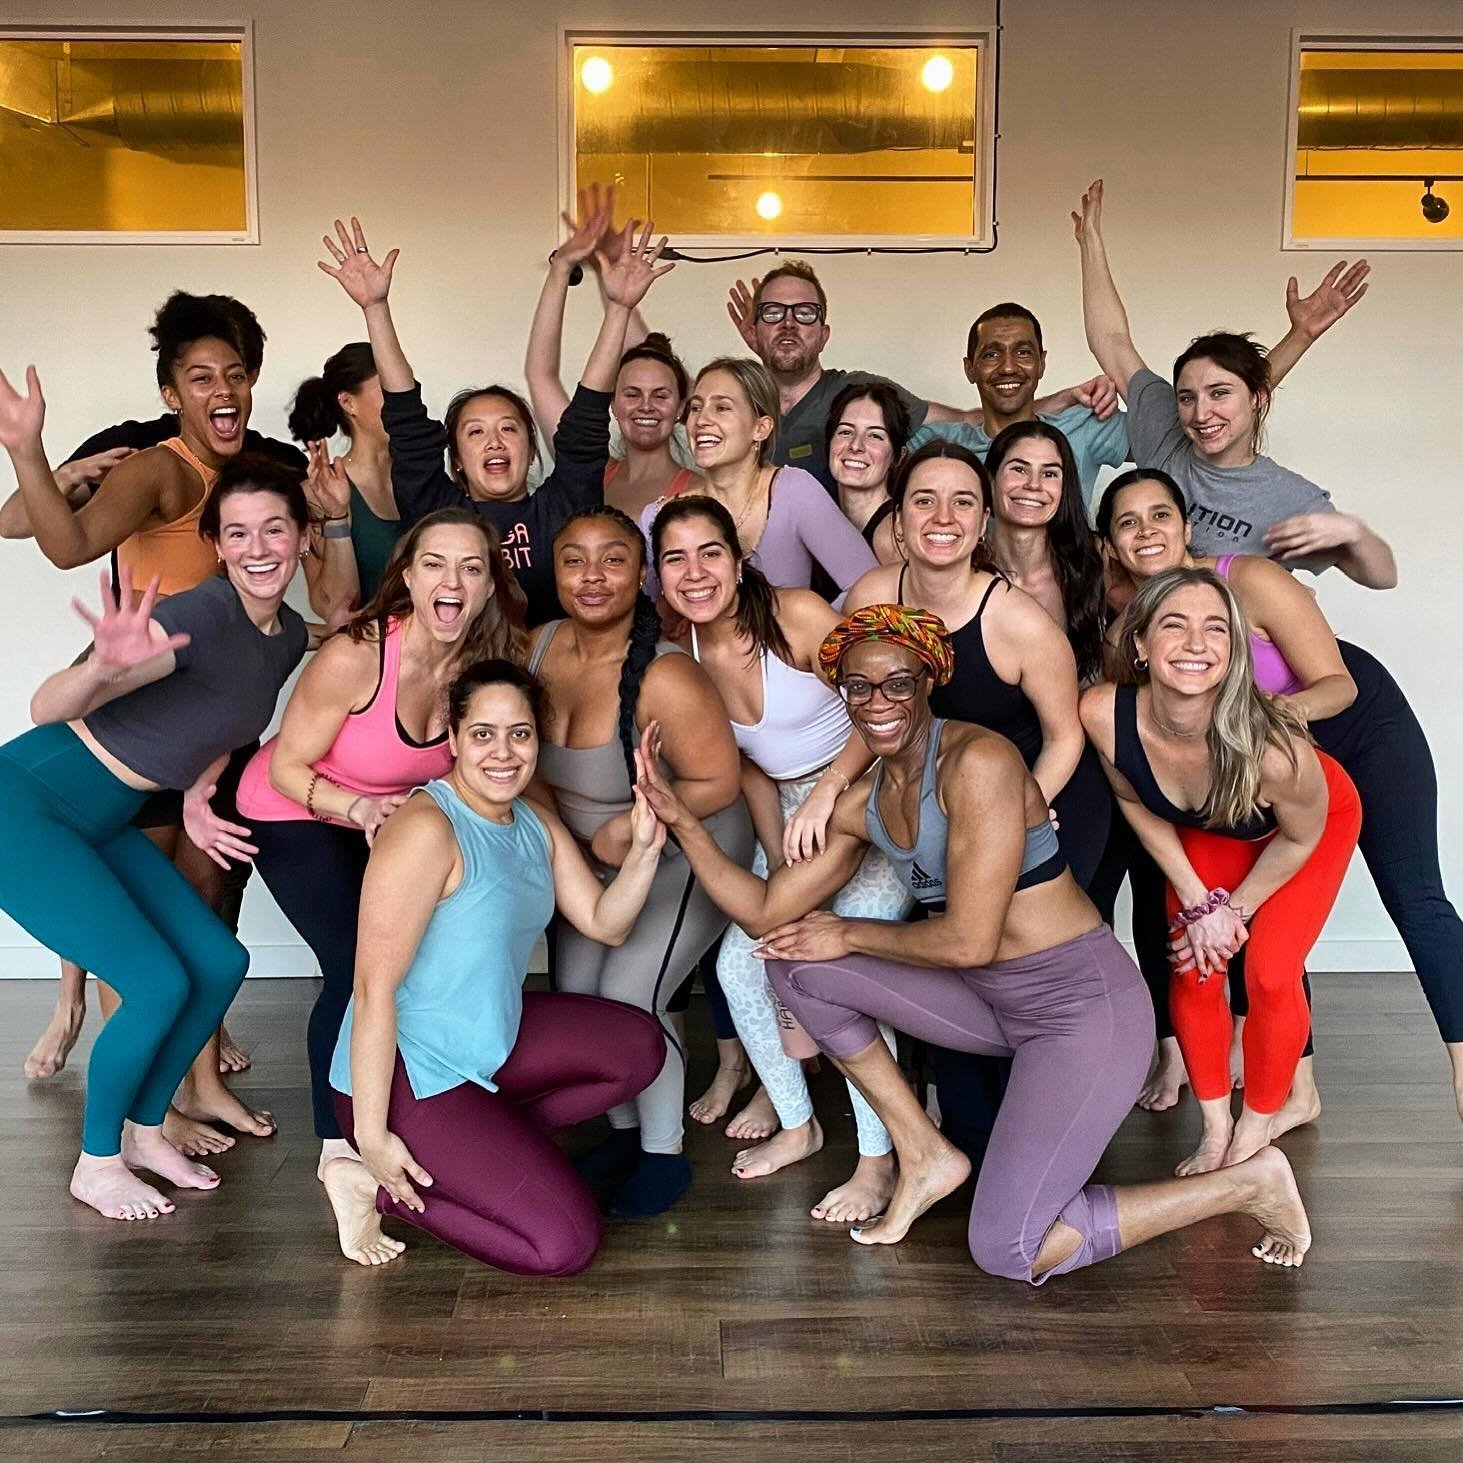 Have you met our teacher trainees around the studio? This is our next group of soon-to-be yoga teachers that graduate from our Teacher Training program this June!

Here&rsquo;s what @jendowsk and @yogajungphl, co-leaders of this year&rsquo;s training